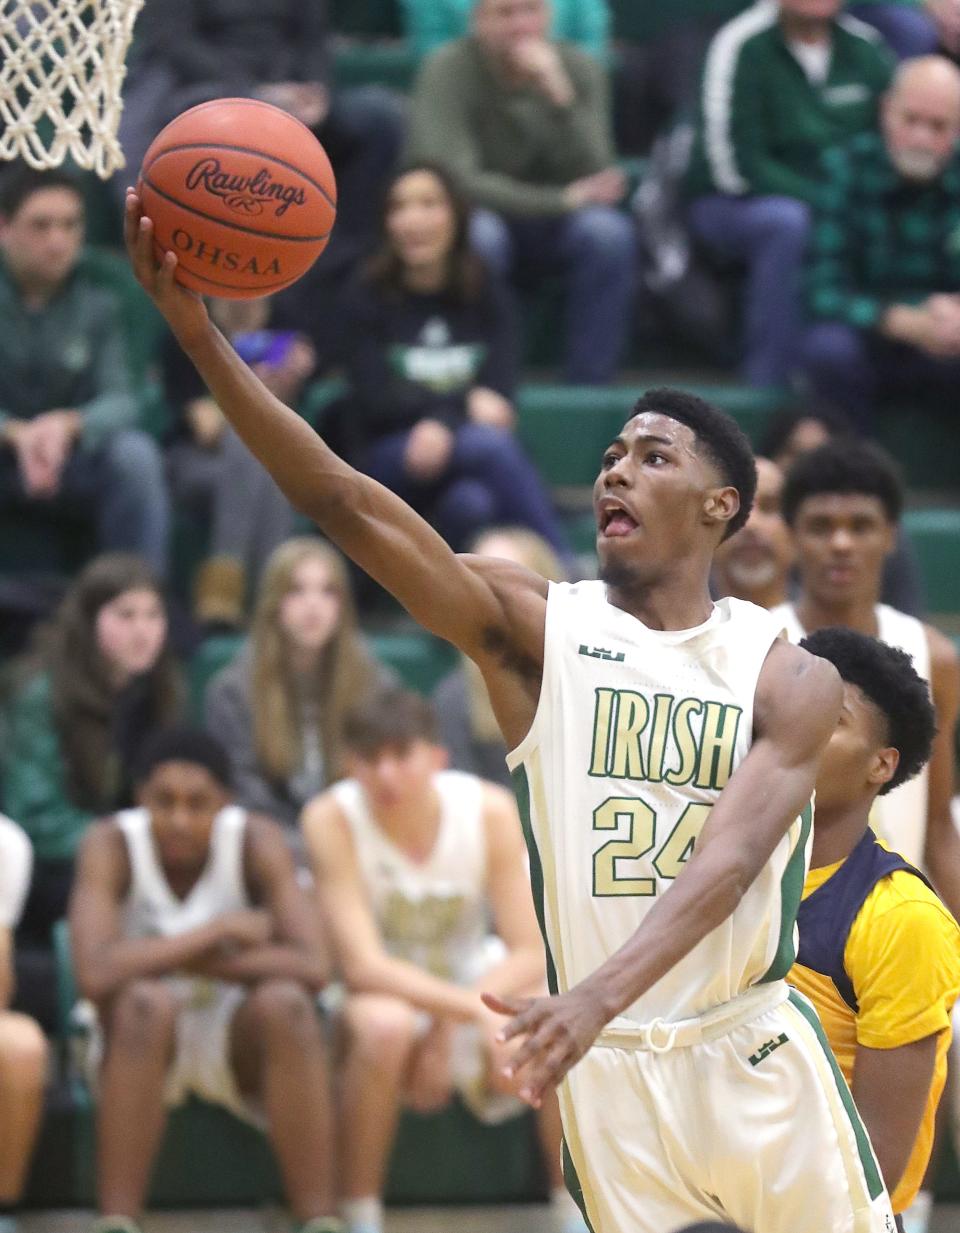 St. Vincent-St. Mary's Sencire Harris drives to the basket against St. Ignatius on Thursday, Jan. 27, 2022 in Akron, Ohio at LeBron James Arena. The Irish won the game 56-38.